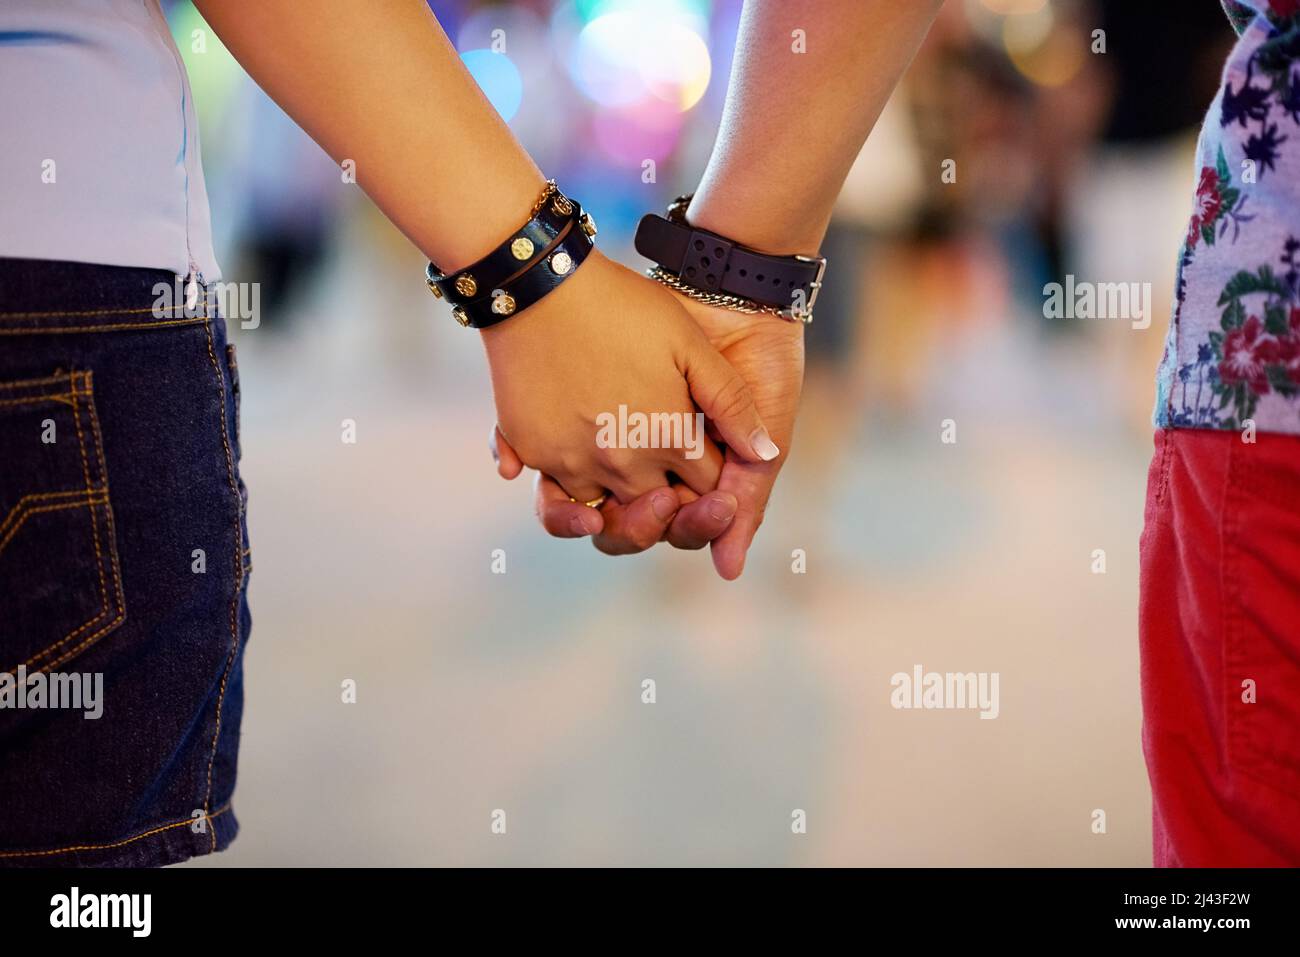 Ill always be by your side. Cropped shot of a couple holding hands while out in the city. Stock Photo